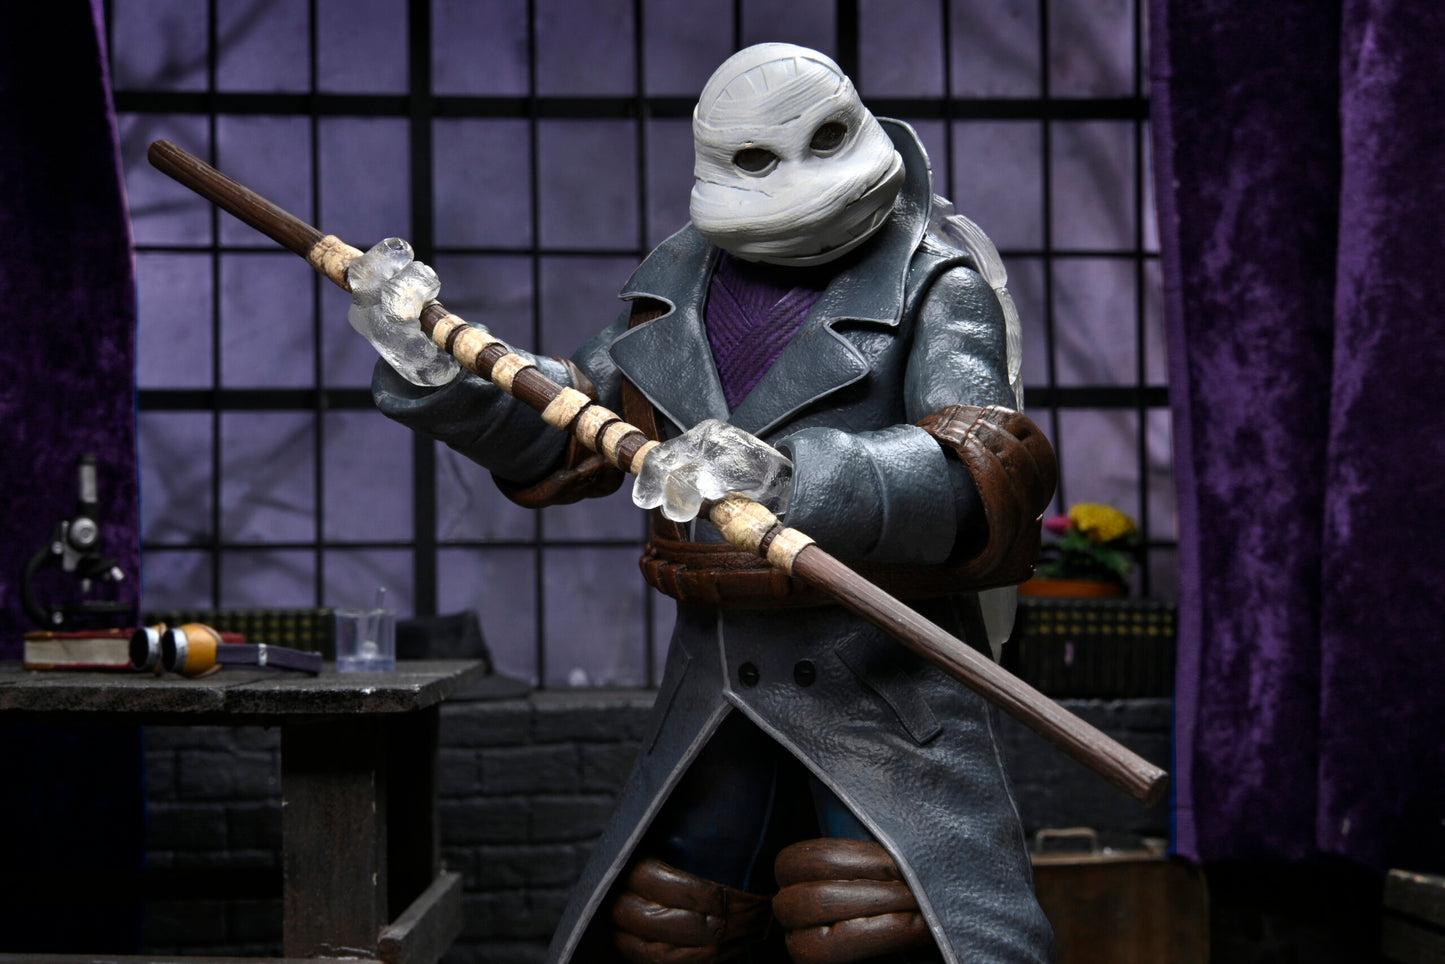 Universal Monsters x Teenage Mutant Ninja Turtles - 7″ Scale Action Figure – Ultimate Donatello as The Invisible Man